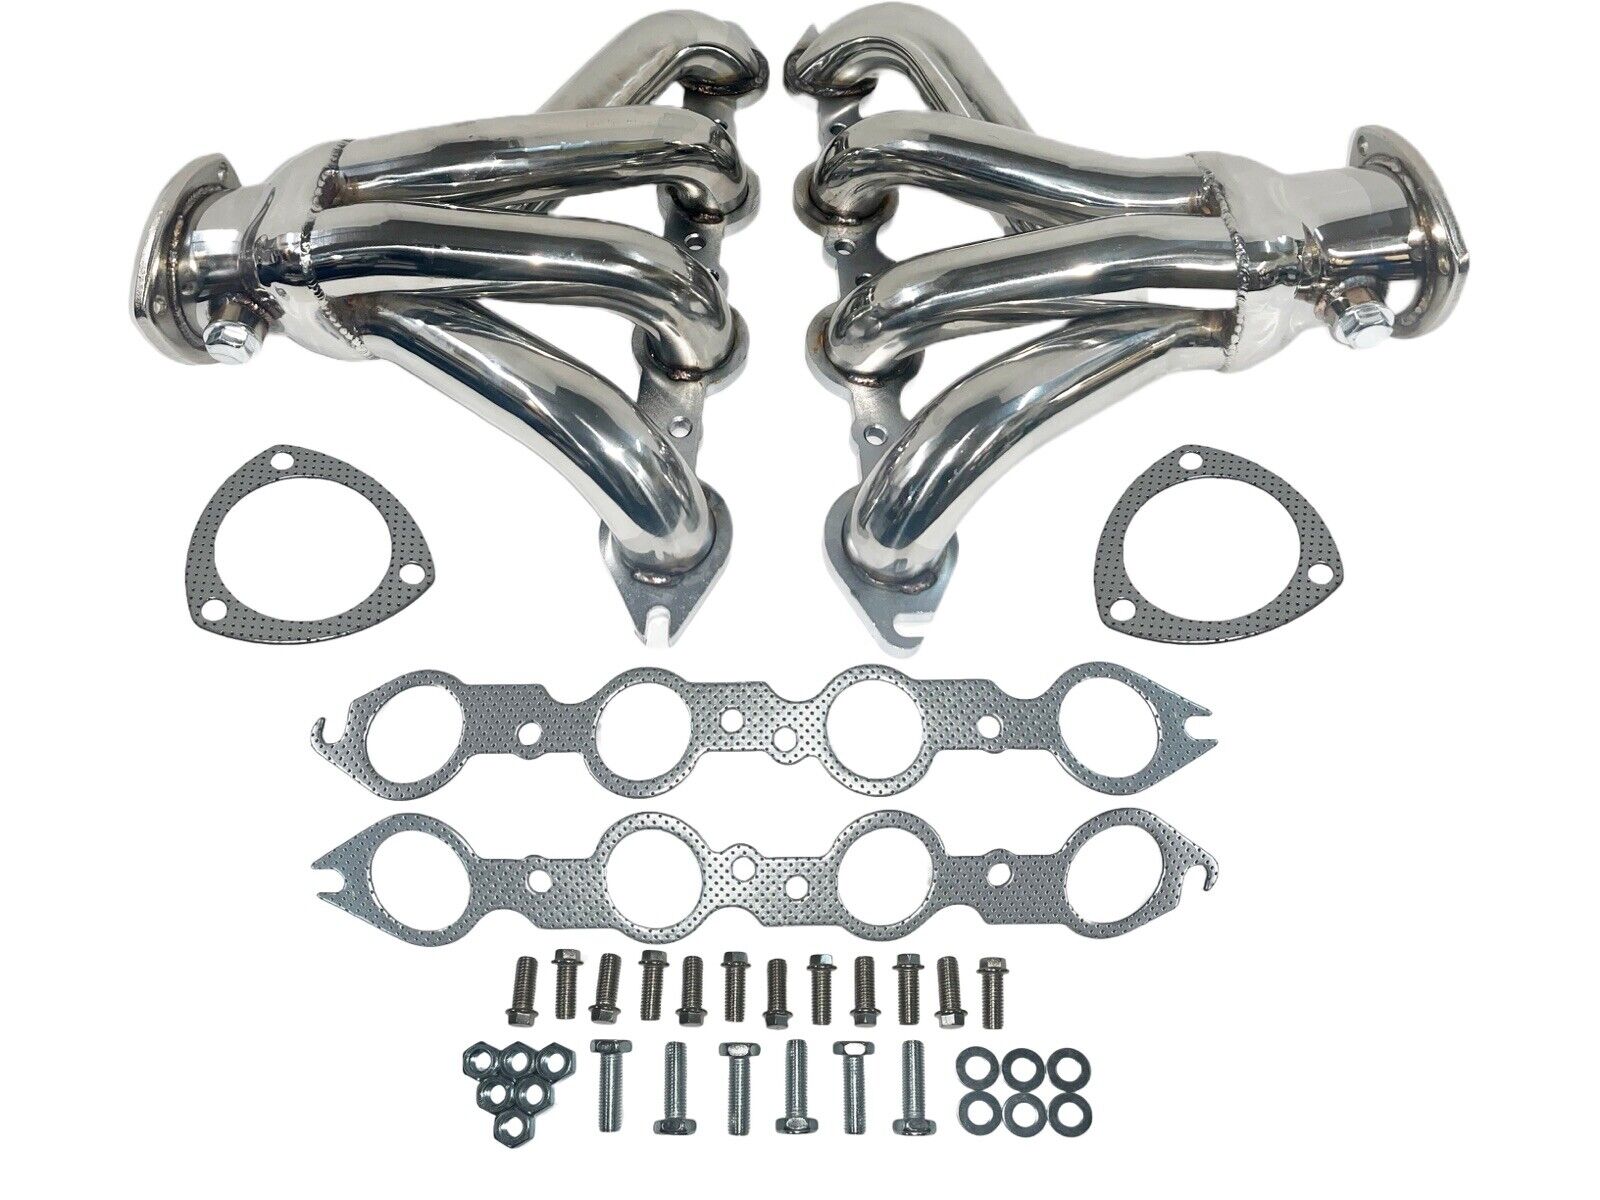 LS Block Hugger Chevy Stainless Exhaust Headers Tight Fit Hot Rod 02 Bung LS1 6